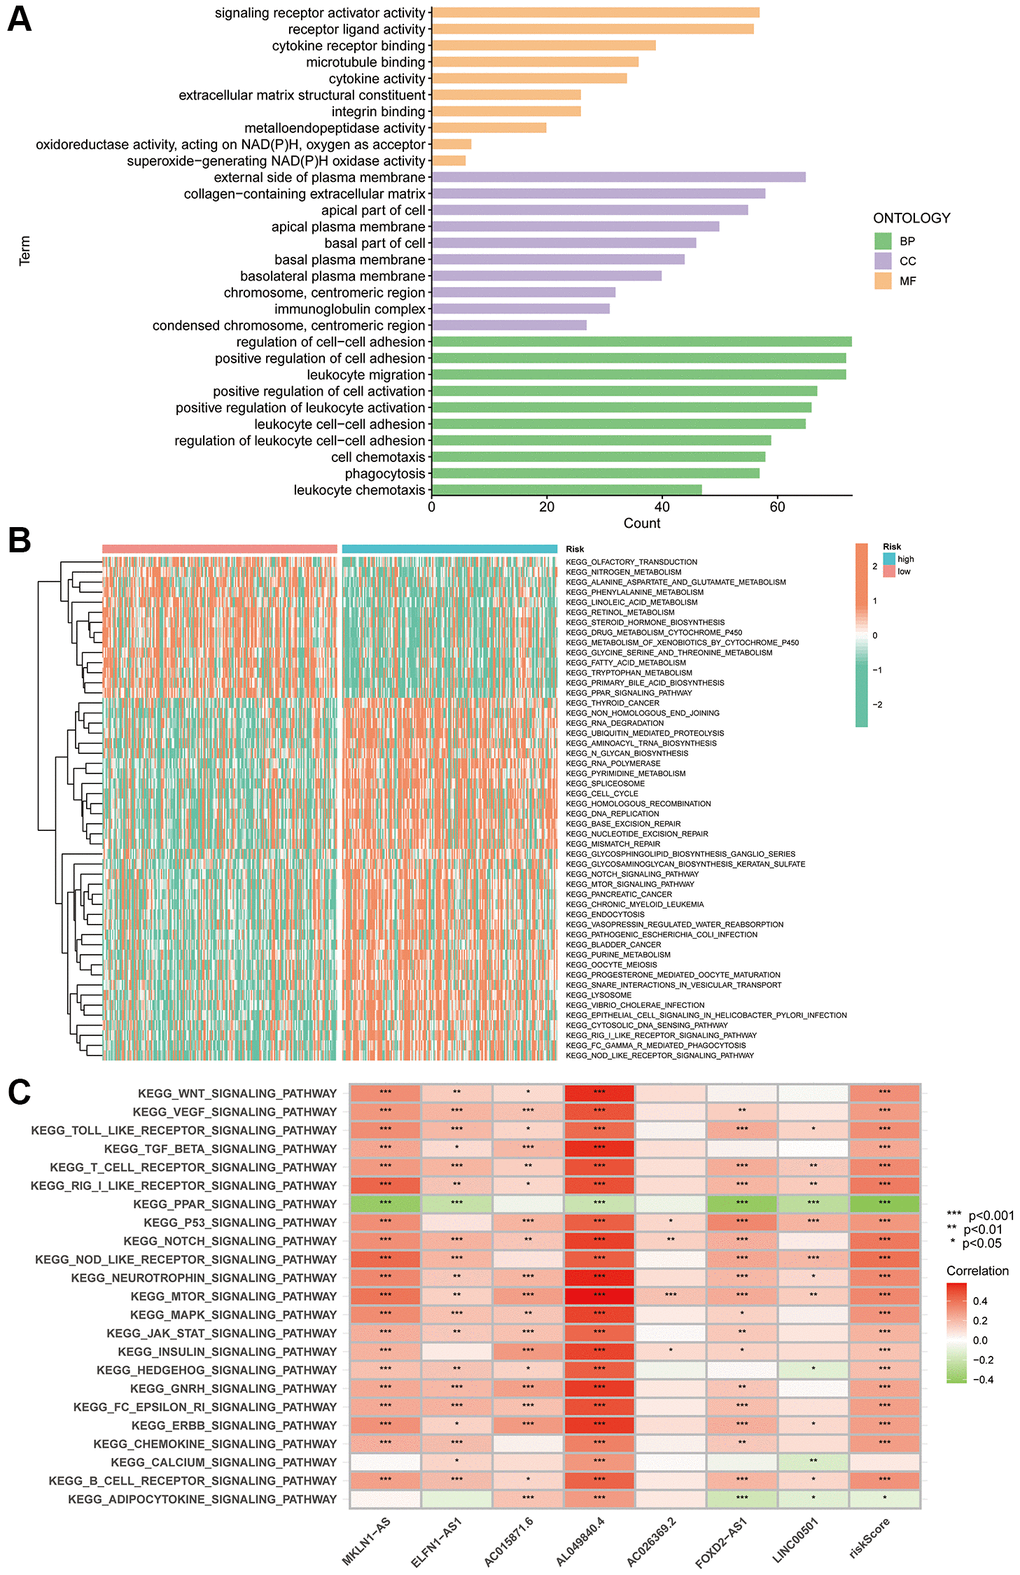 PANRI-based GO and KEGG analysis. (A) GO analysis shows the enrichment of DEGs between the risk groups. (B) Heat map of functional pathway enrichment differences between the risk groups. (C) Heat map of the spearman correlation analysis between the expression of the seven lncRNAs involved in the model construction and tumour-related pathways.